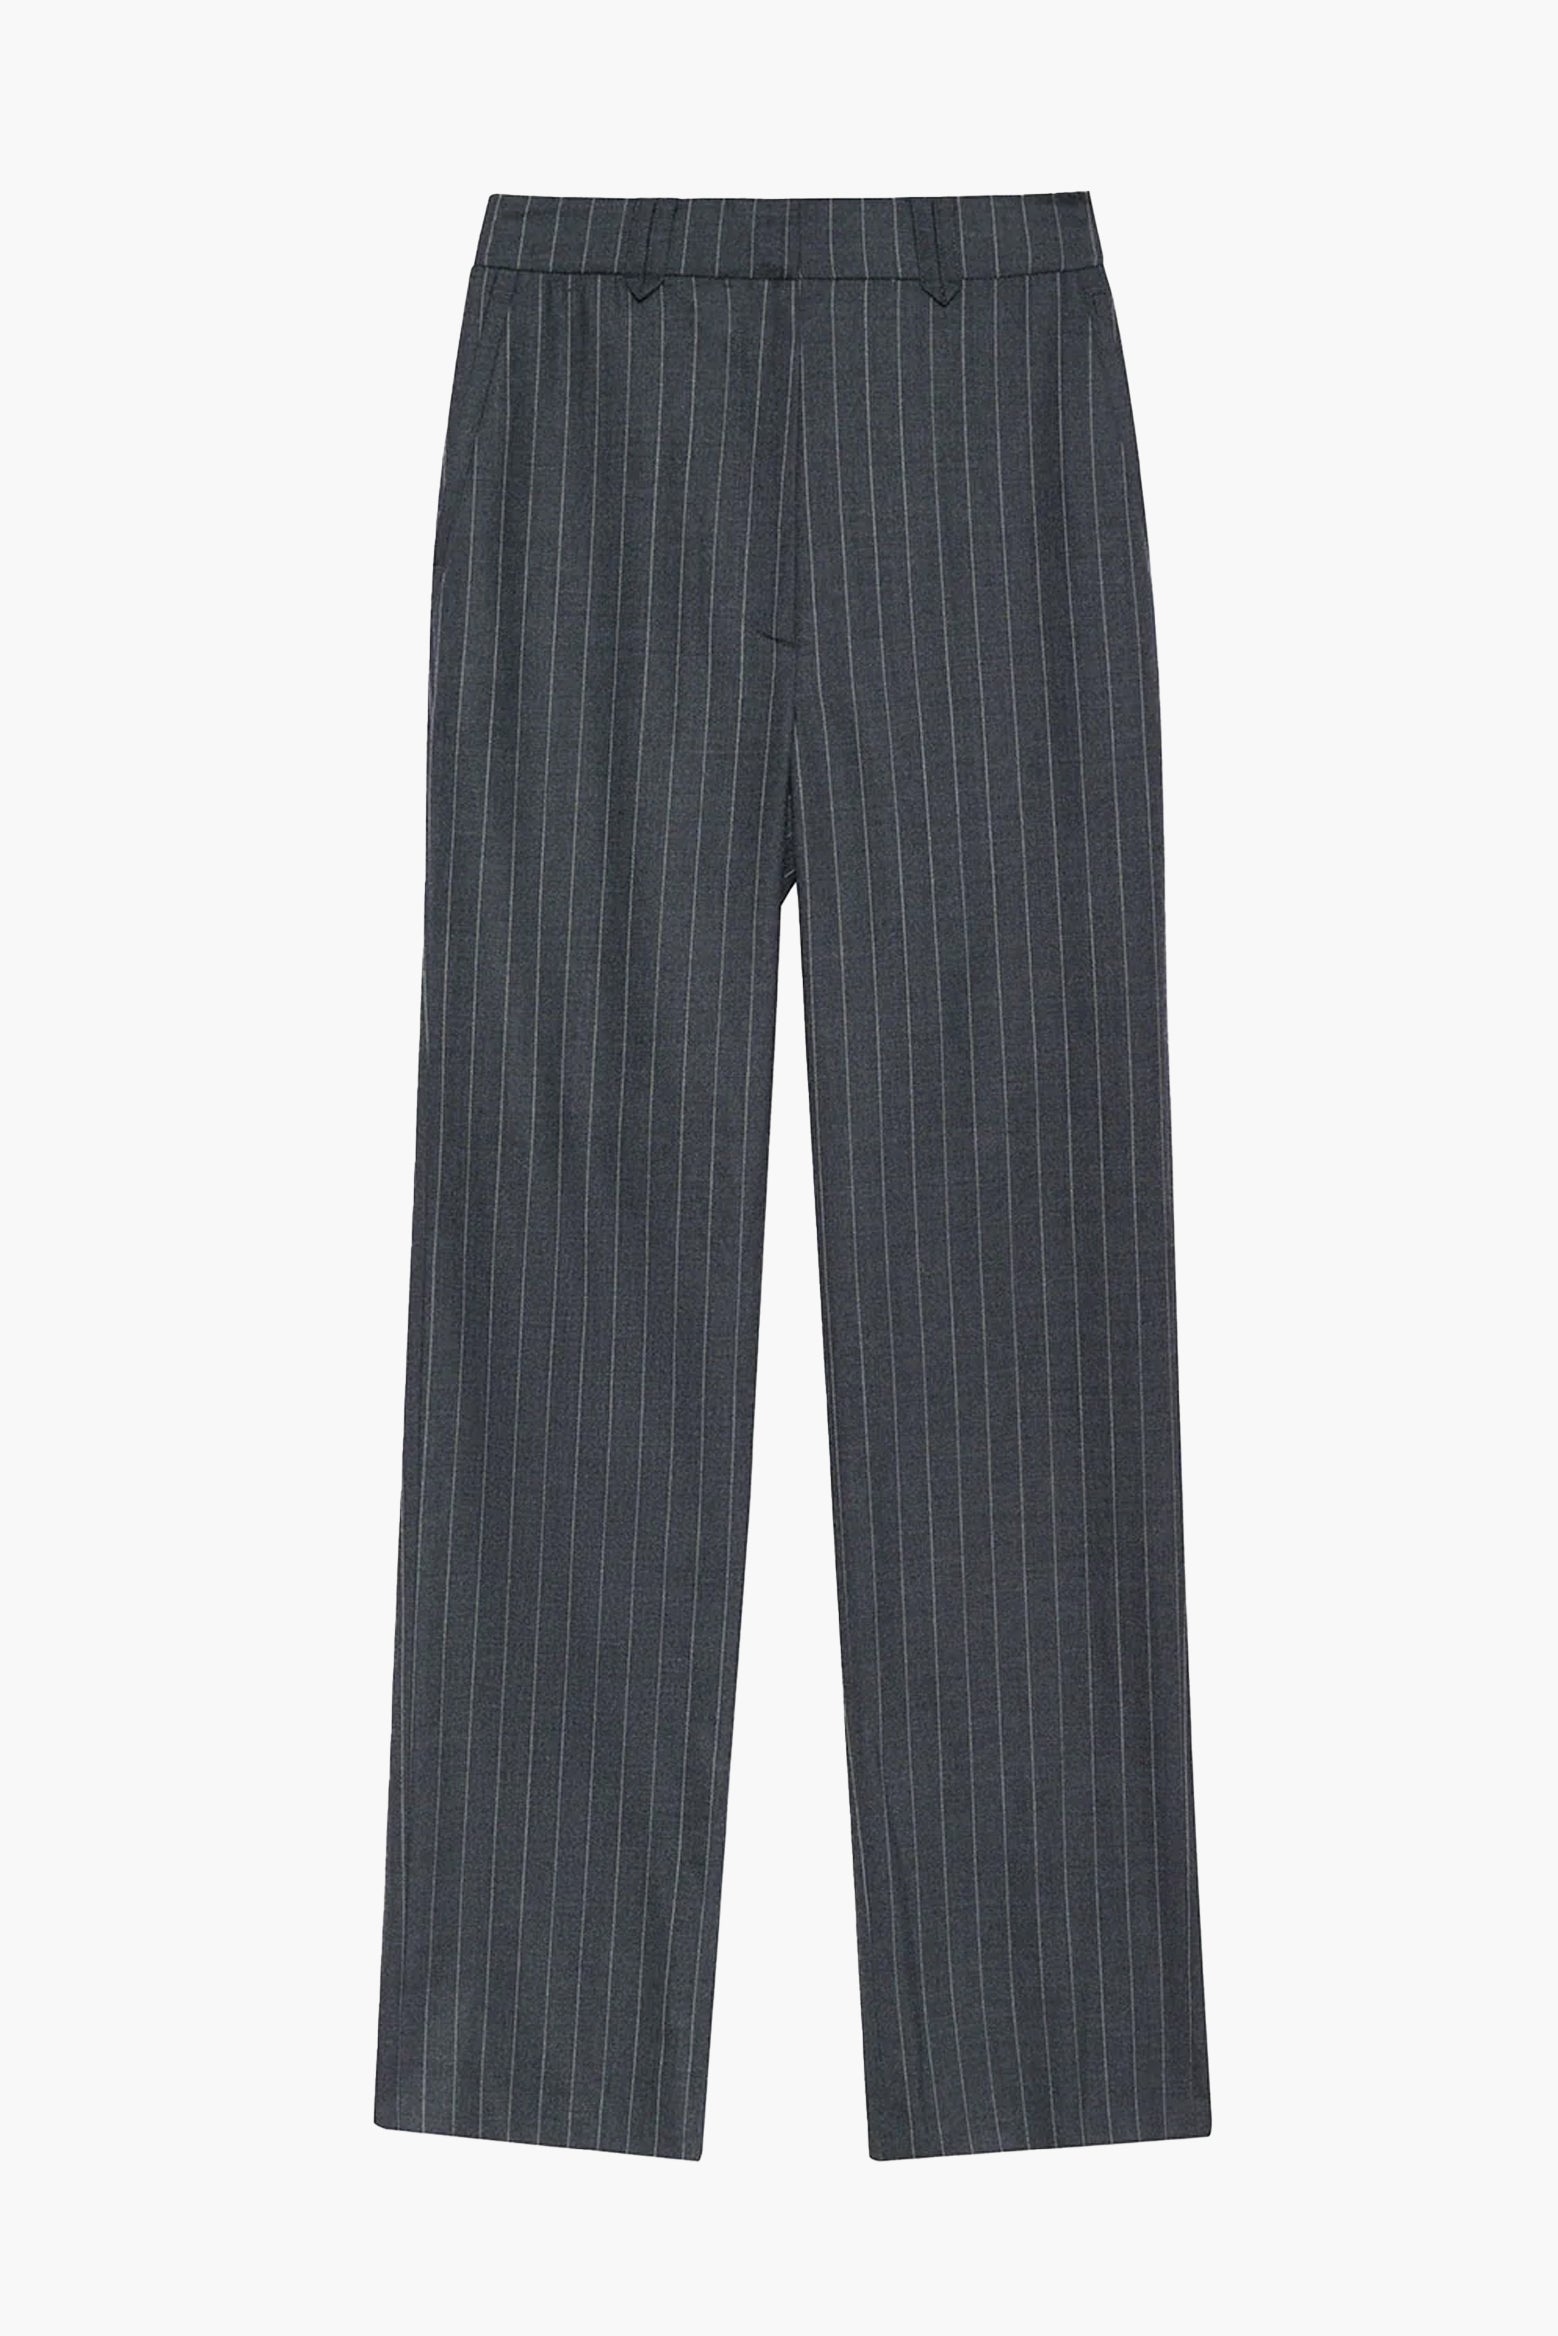 Anine Bing Drew Pant in Grey Pinstripe available at The New Trend Australia. 